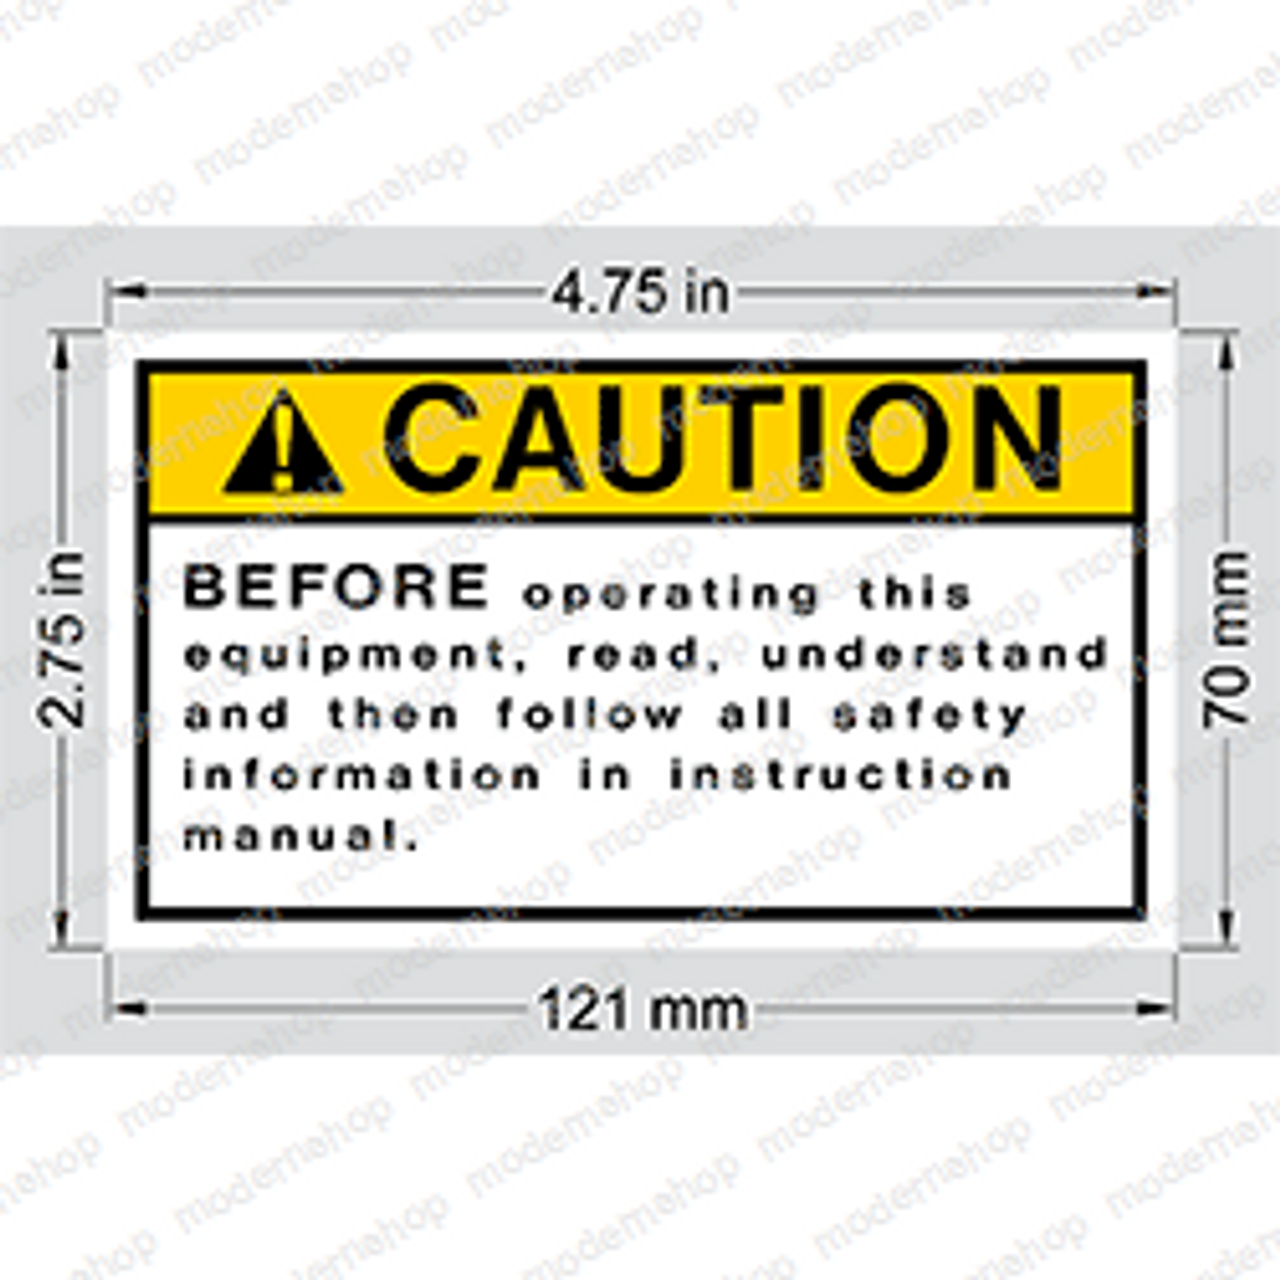 066554-000: Upright DECAL - CAUTION READ INSTRUCTN